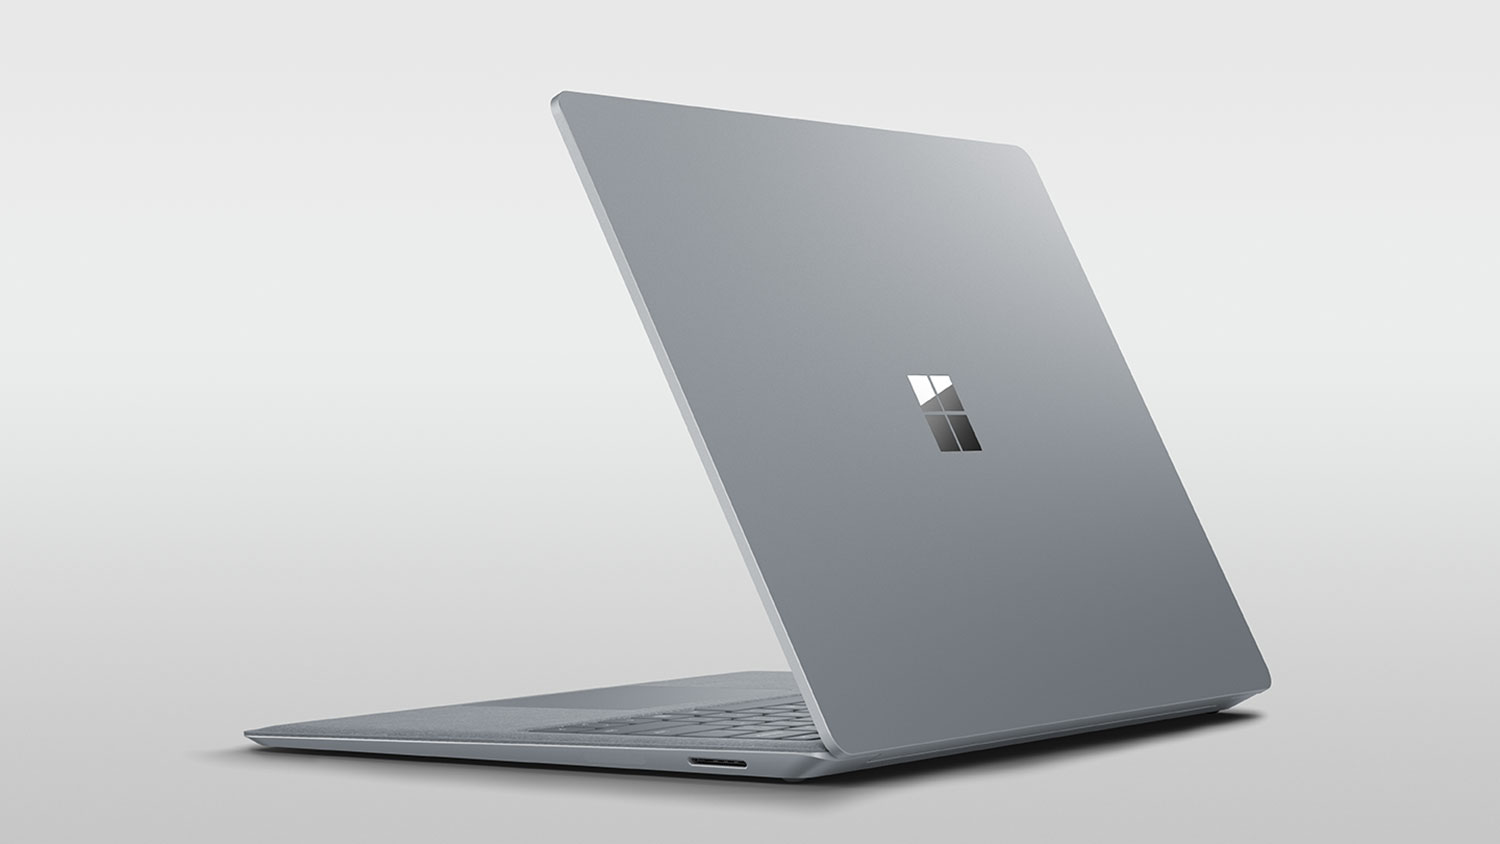 Microsoft Surface Laptop is now available in Singapore